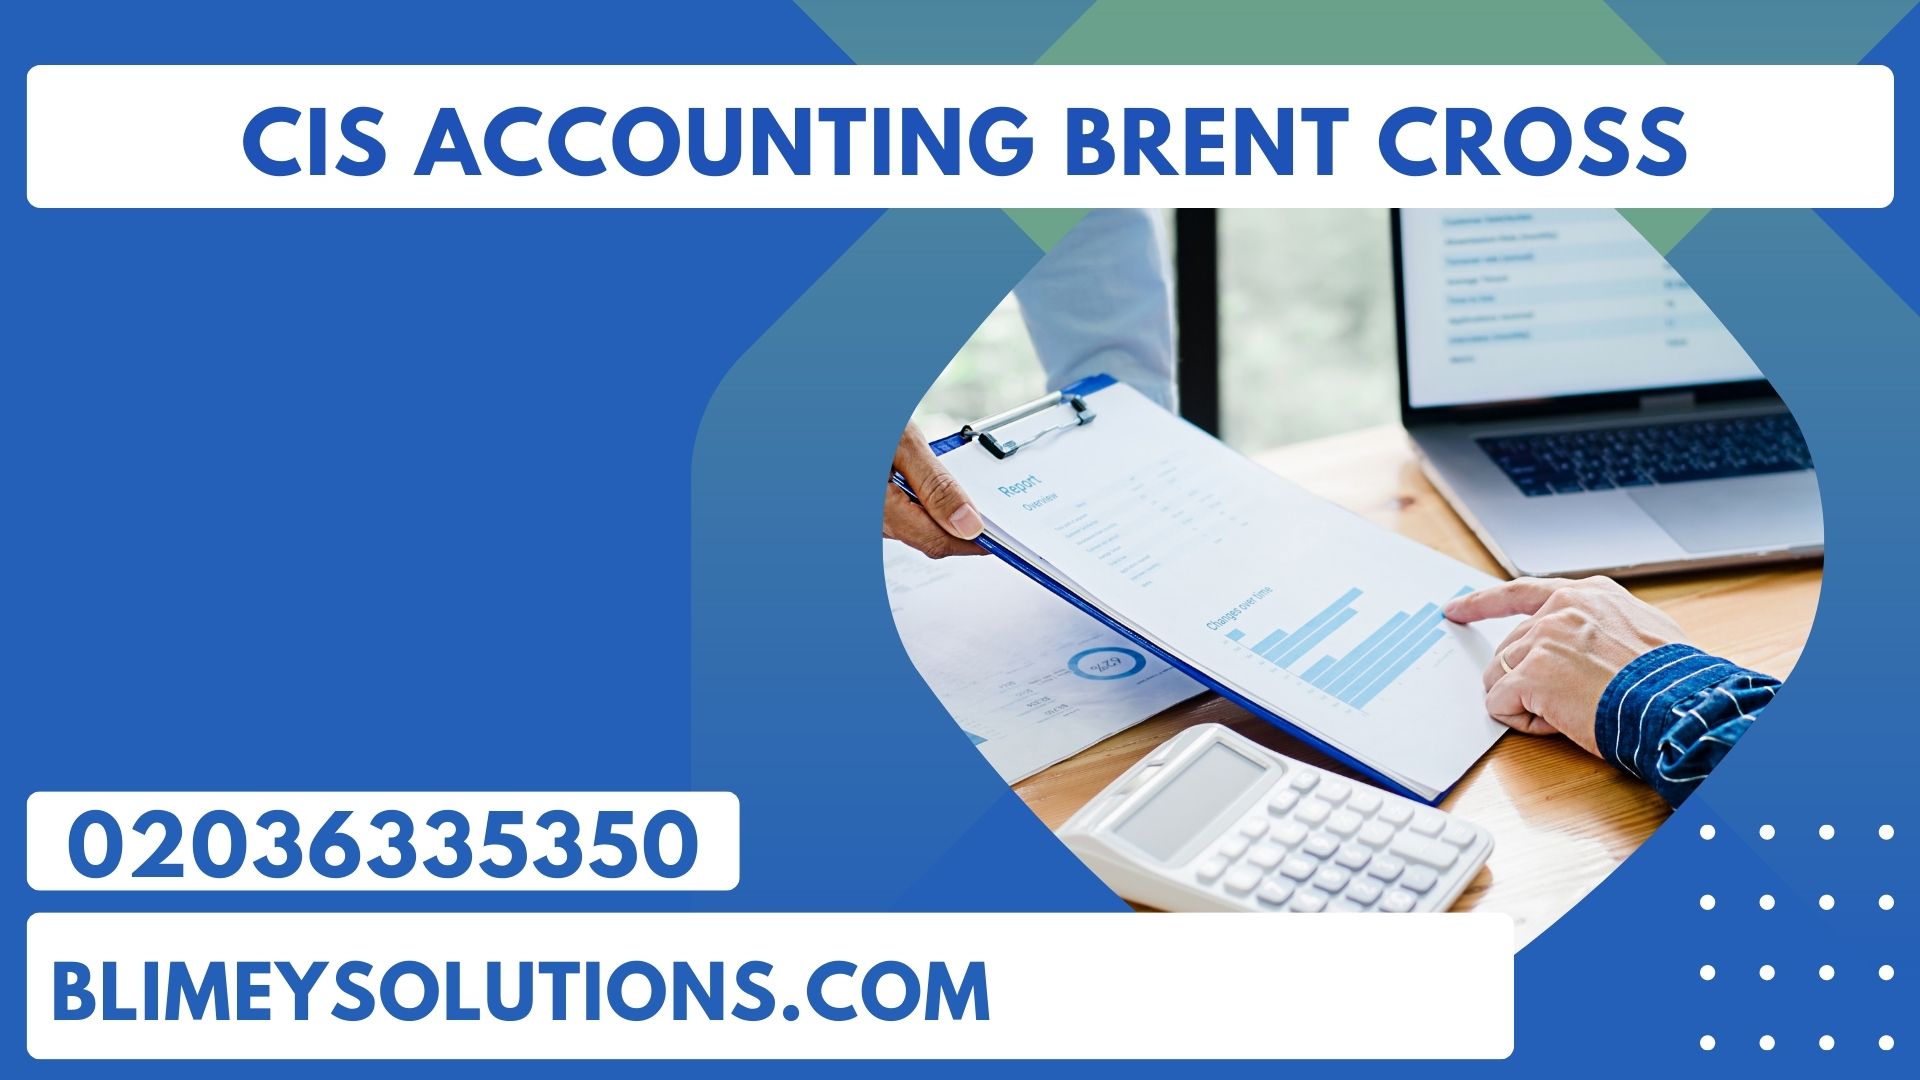 CIS Accounting in Brent Cross NW4 London